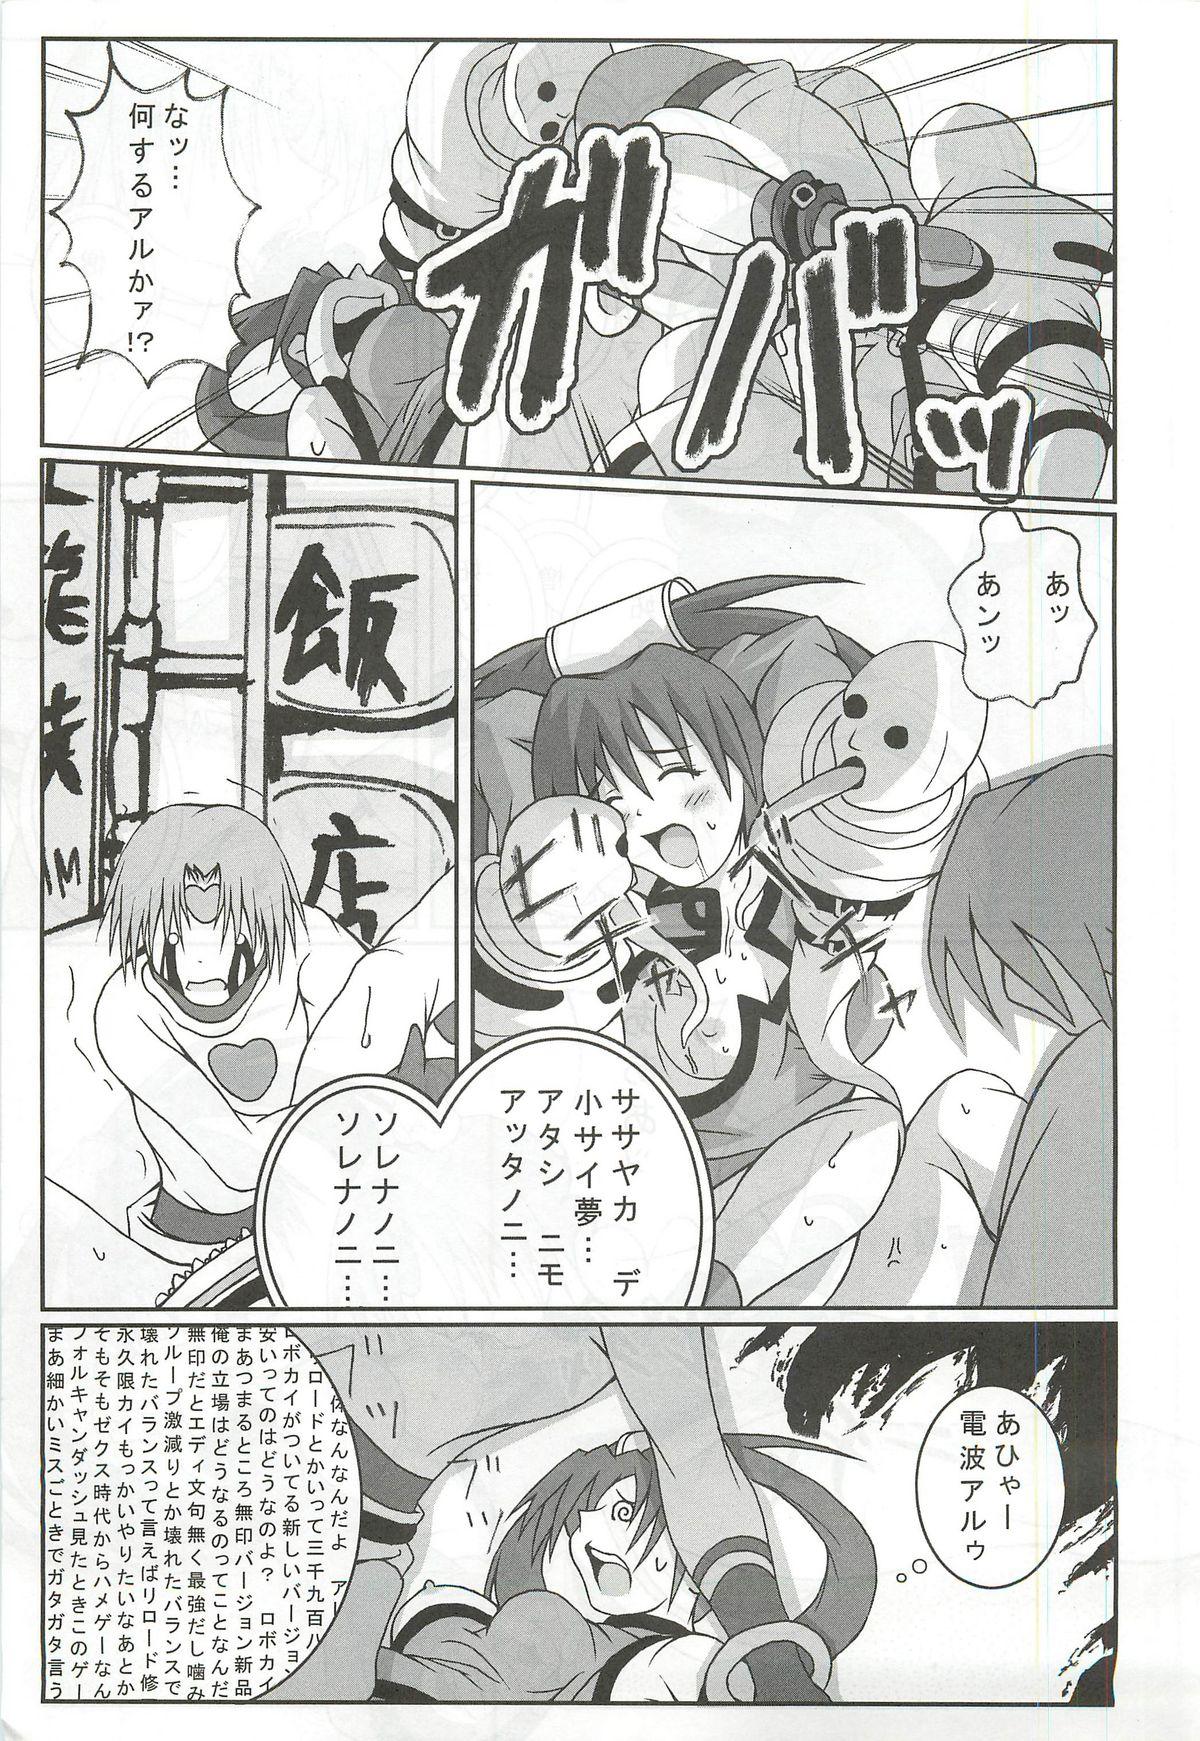 Tanned Passionless 2 - Guilty gear Club - Page 4